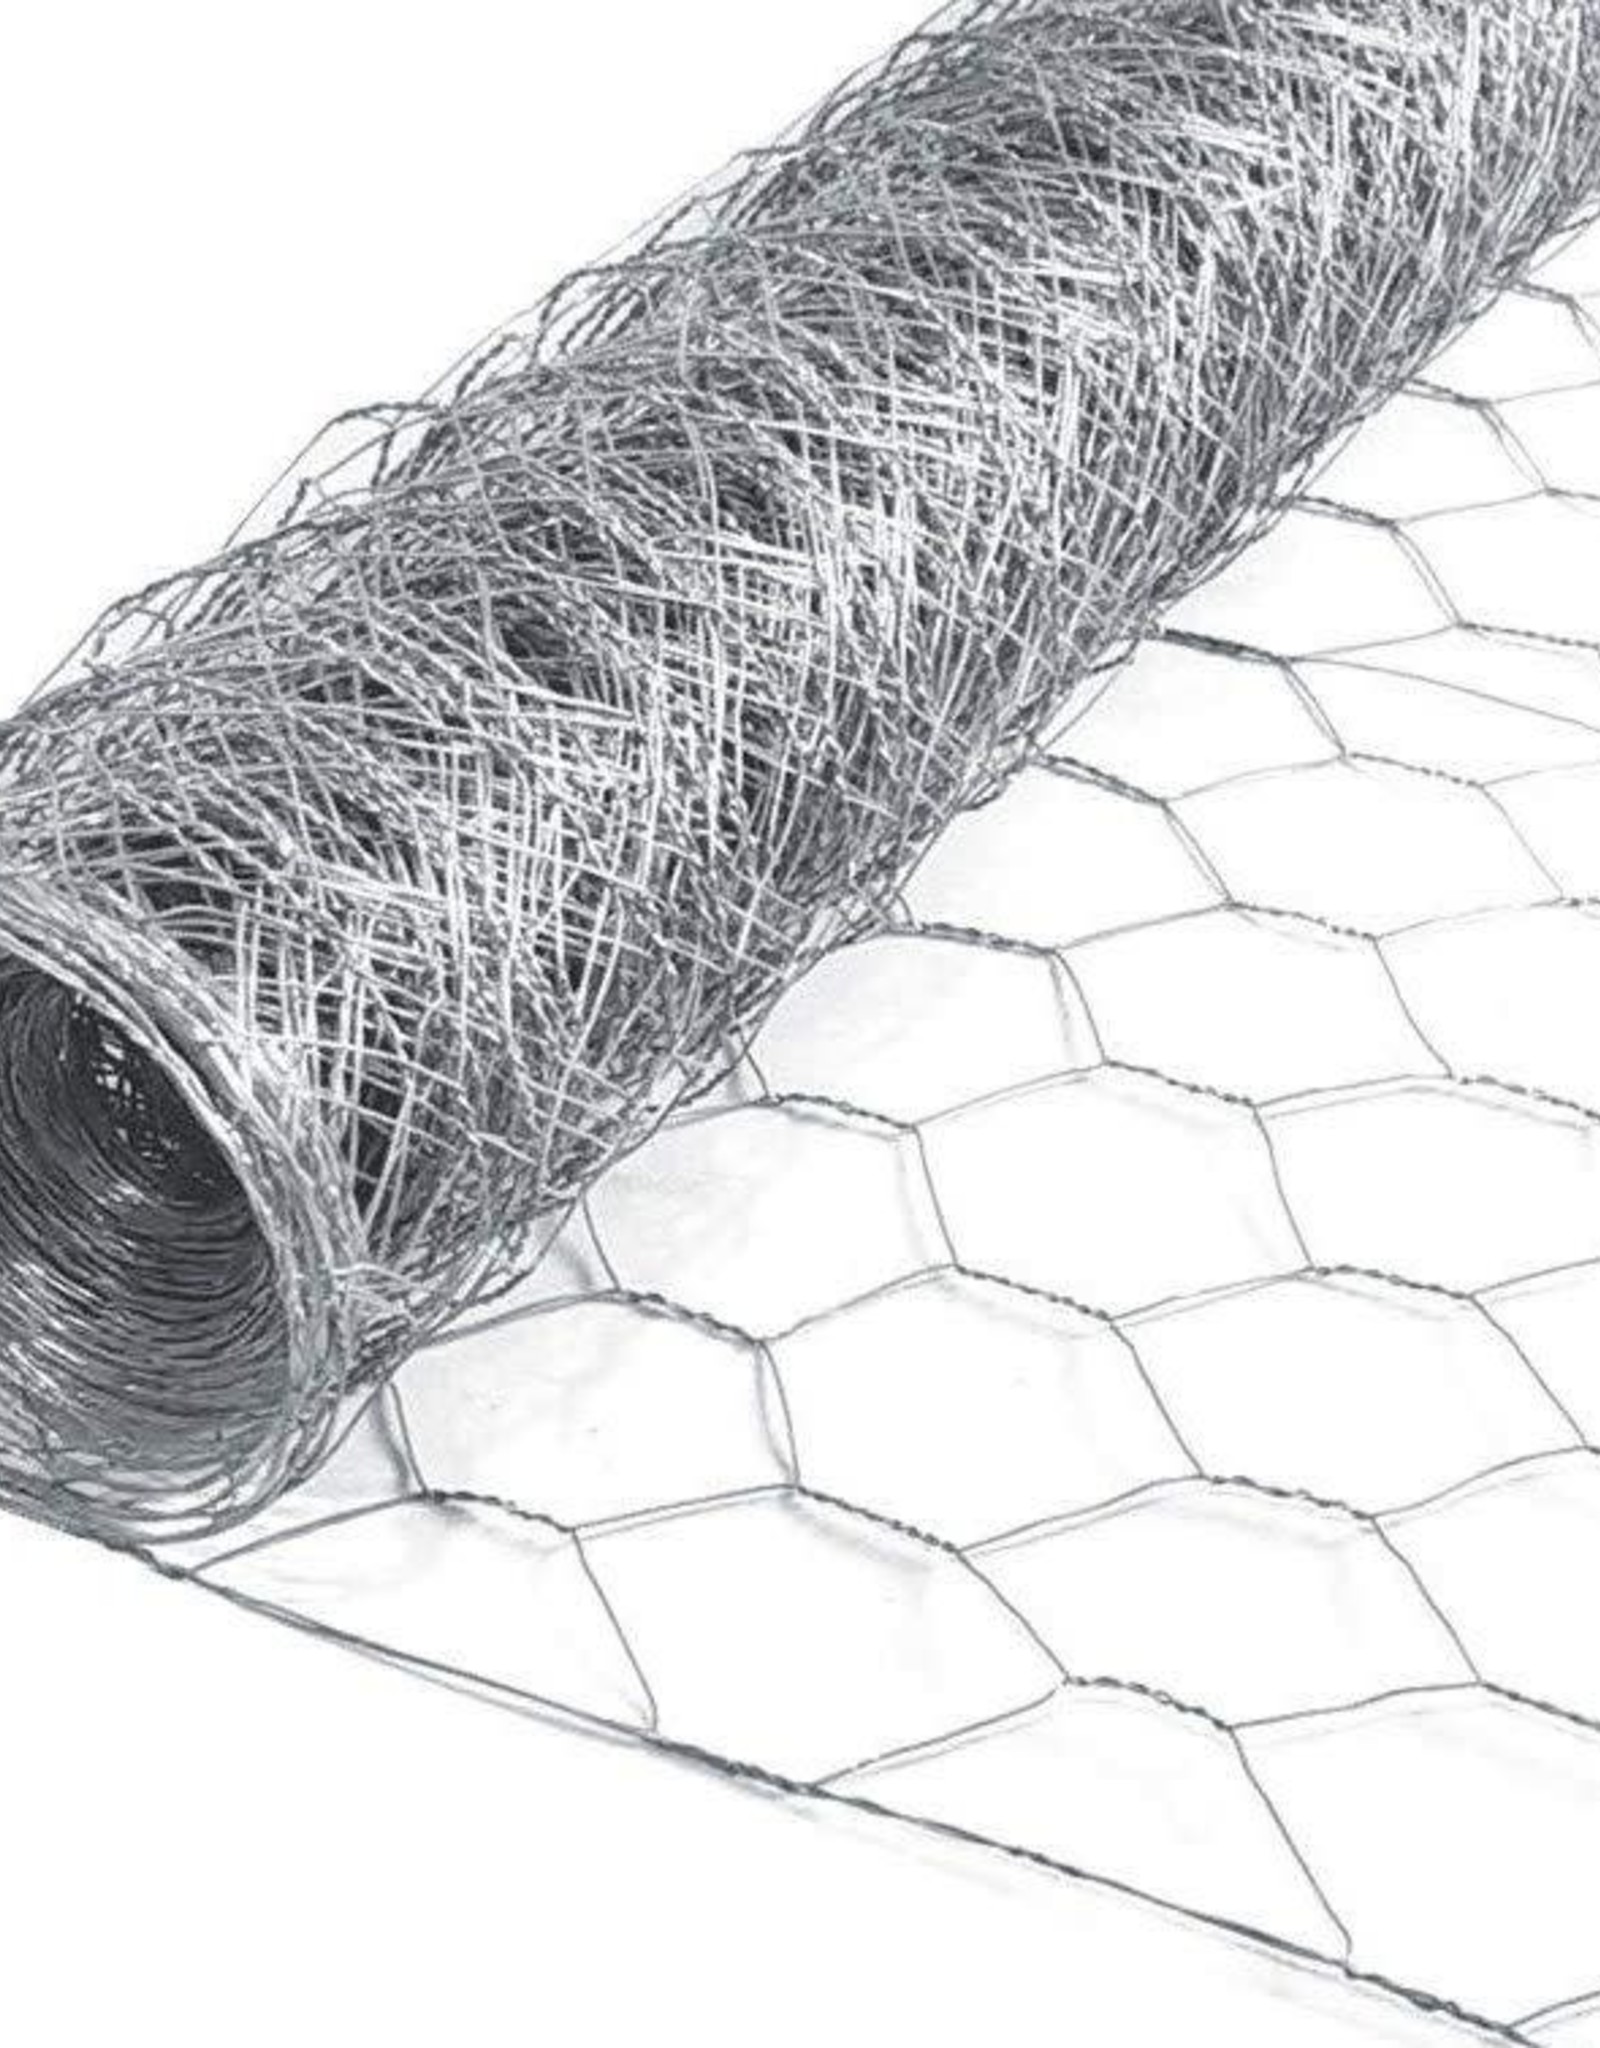 Grip-Rite 48x2x20GAx150ft Poultry Netting